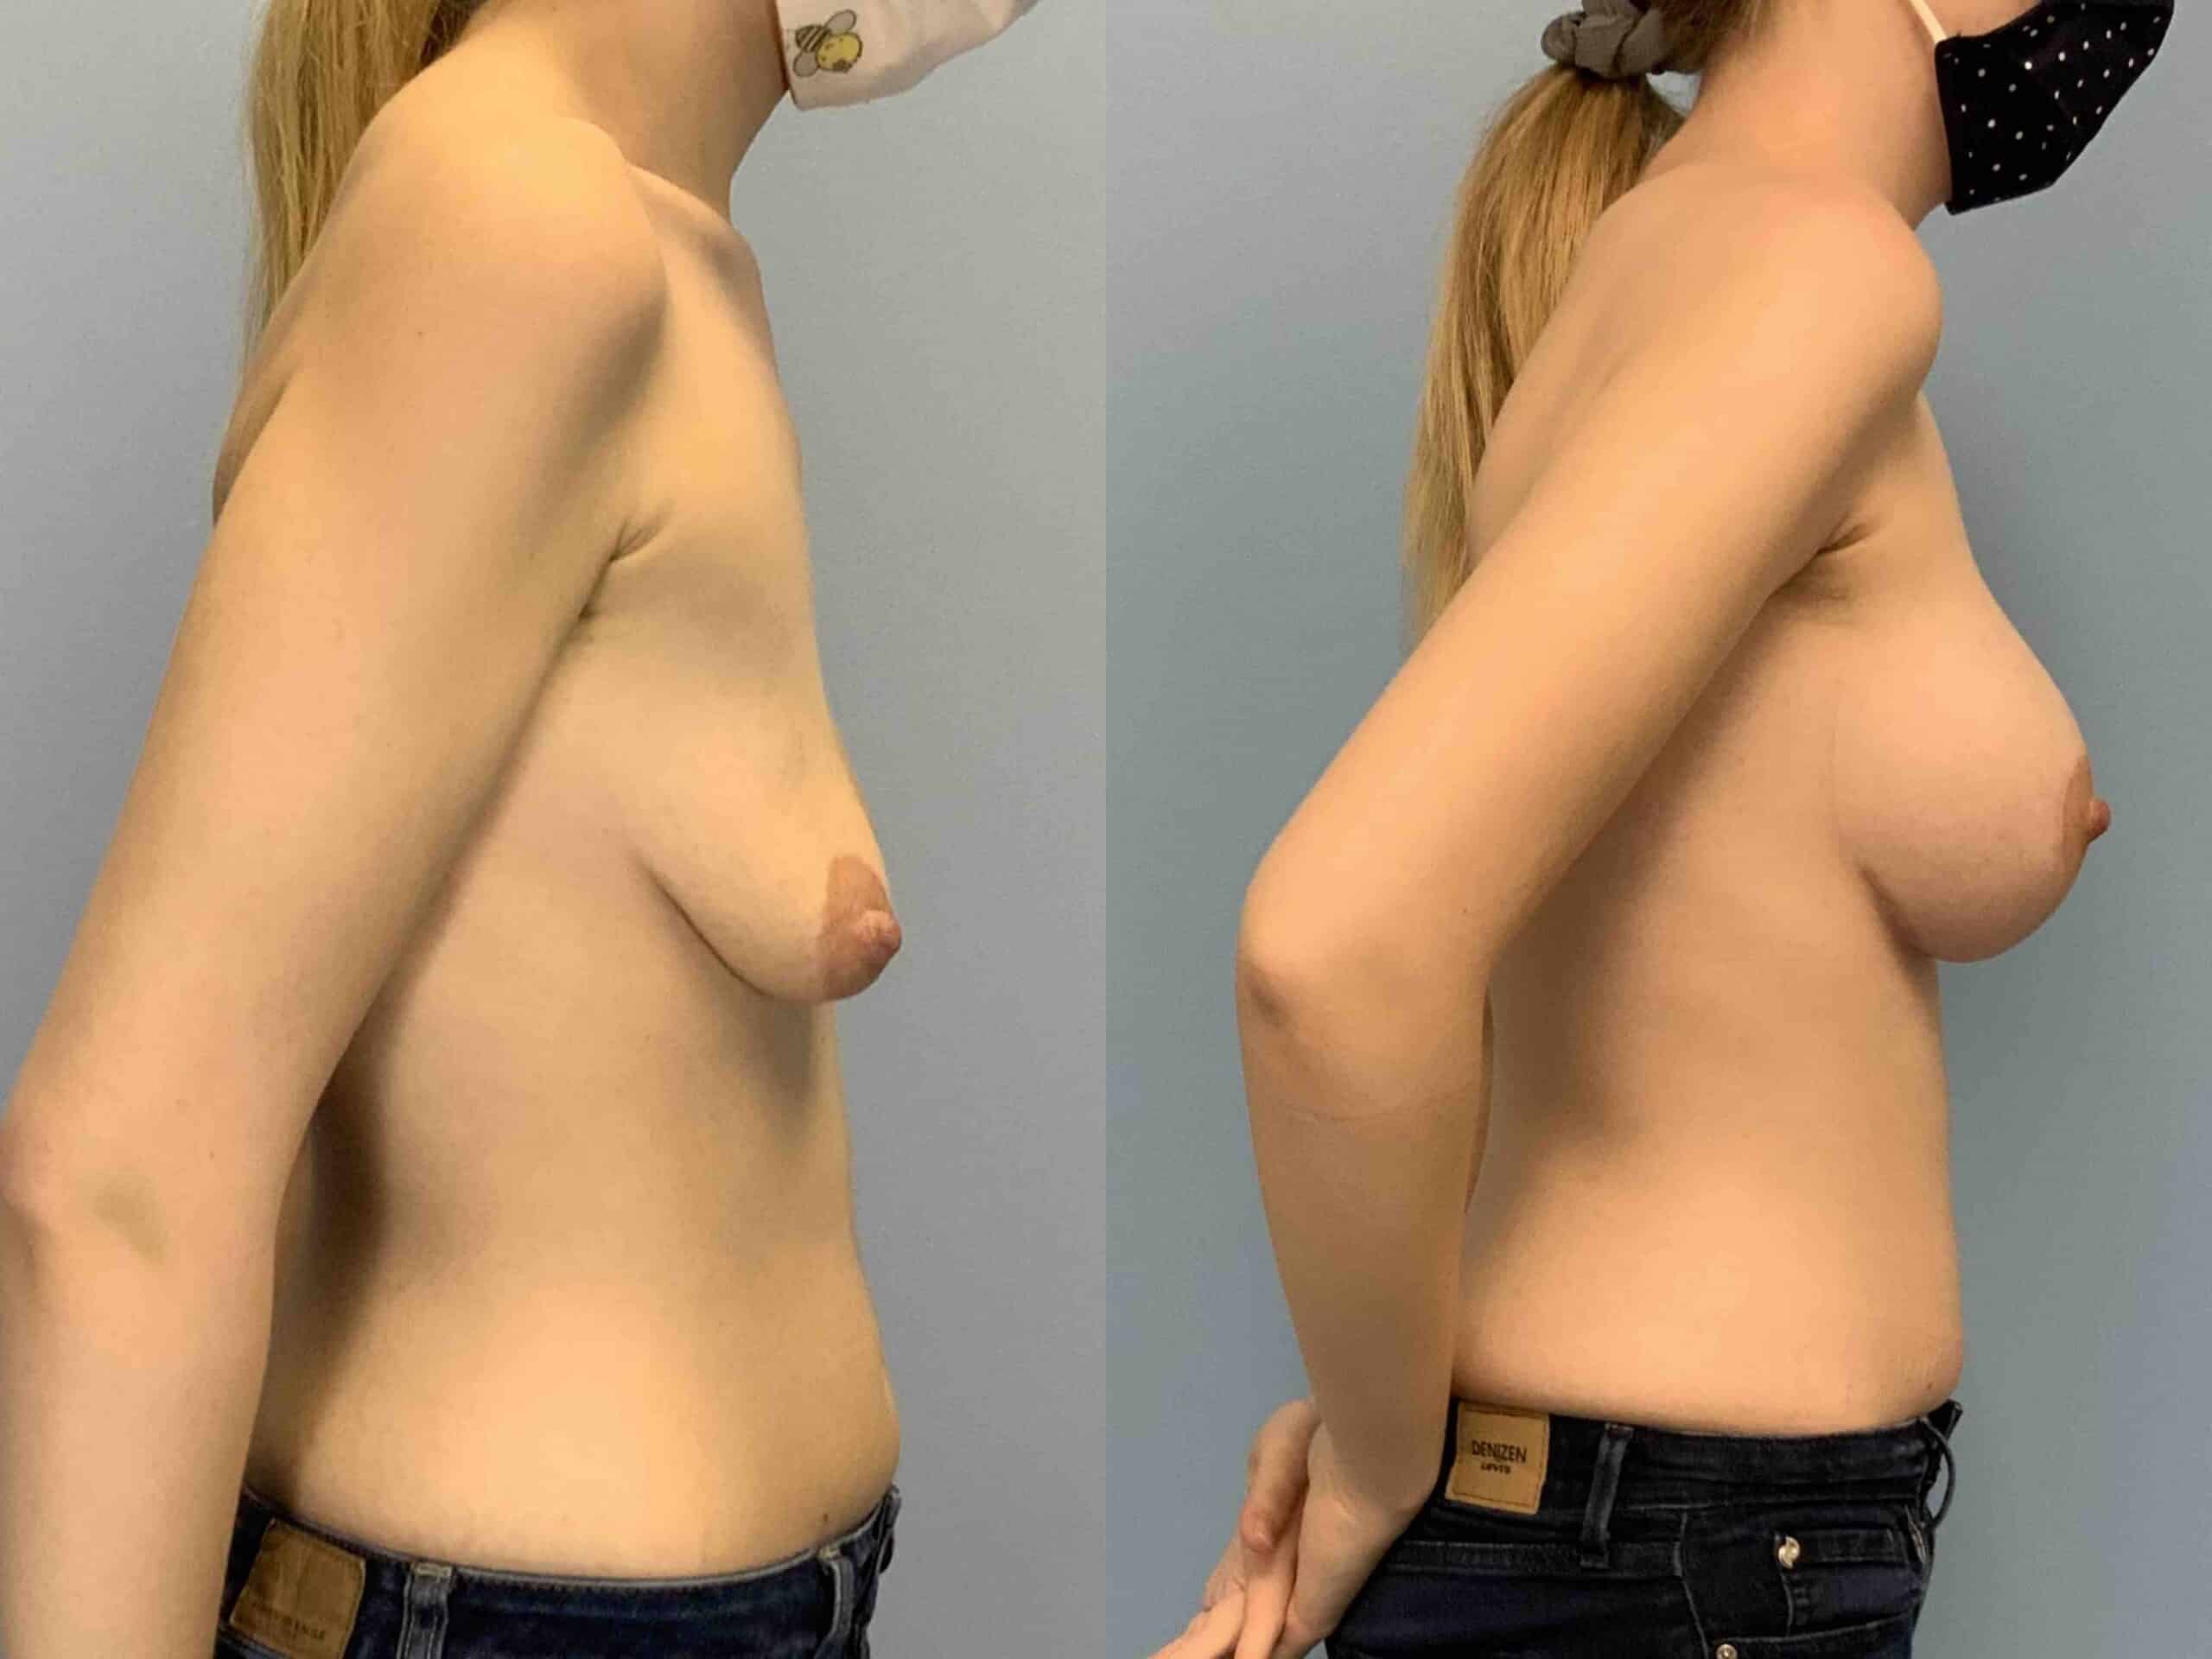 Before and after, 7 mo post op from Breast Augmentation, Strattice, Breast Lift/Mastopexy, performed by Dr. Paul Vanek (side view)